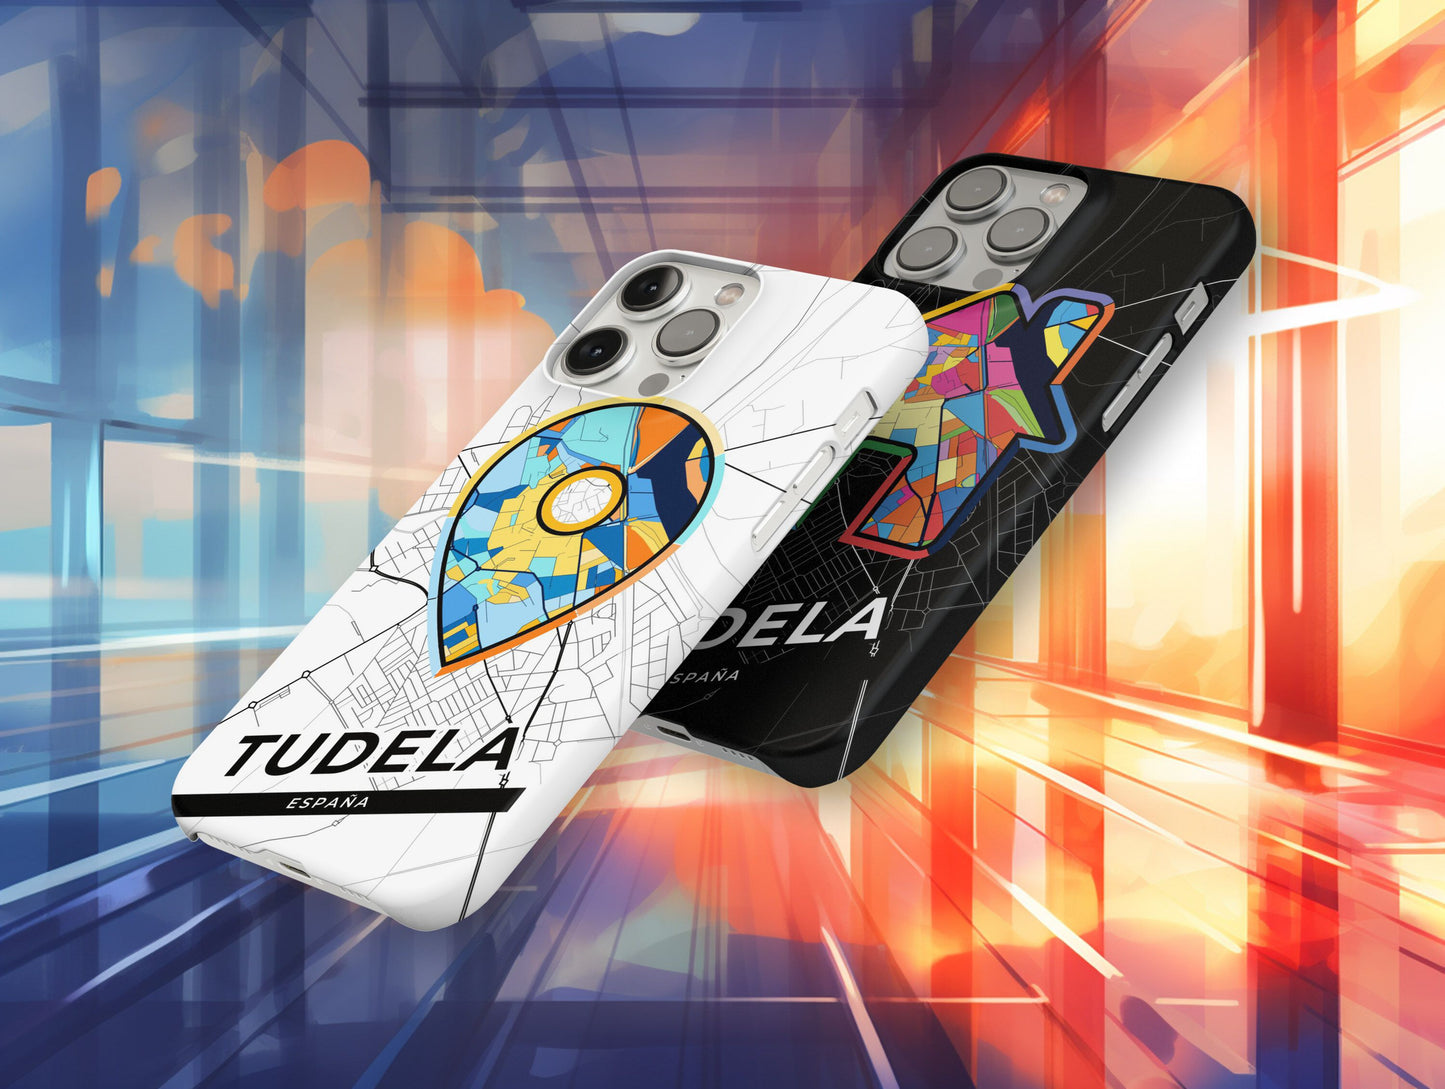 Tudela Spain slim phone case with colorful icon